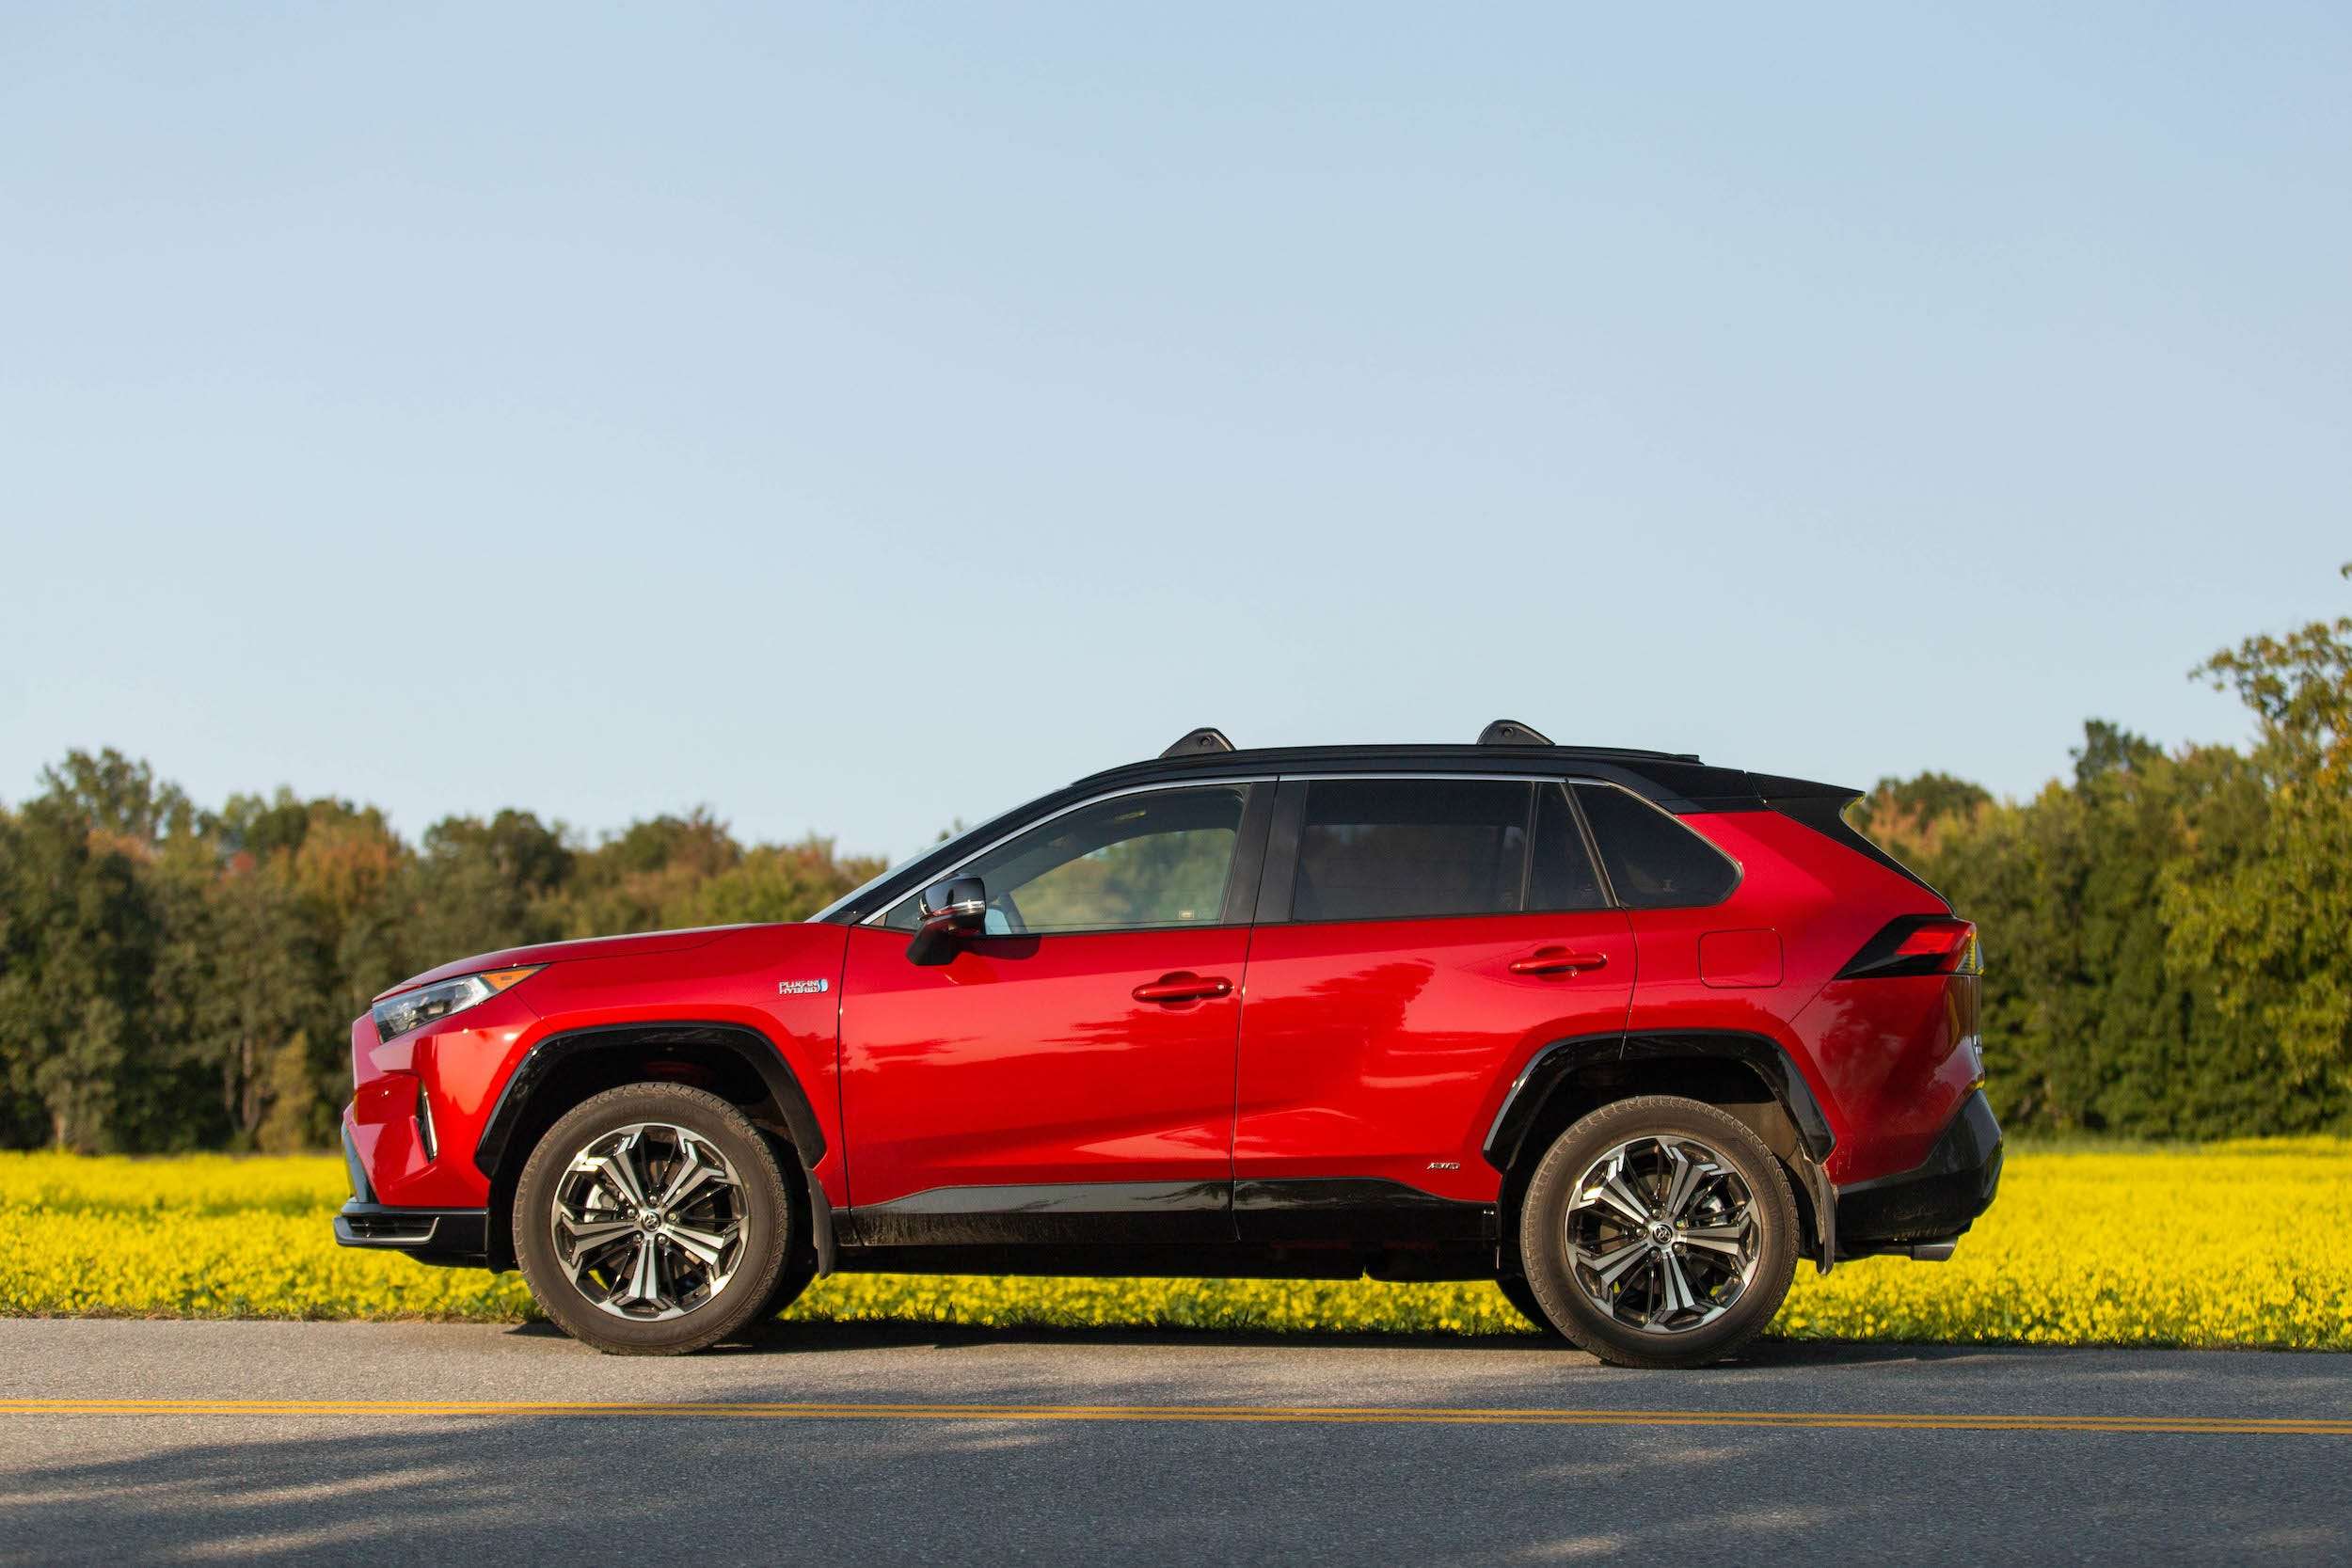 REVIEW The Toyota RAV4 Prime plugin hybrid is perfect for those who